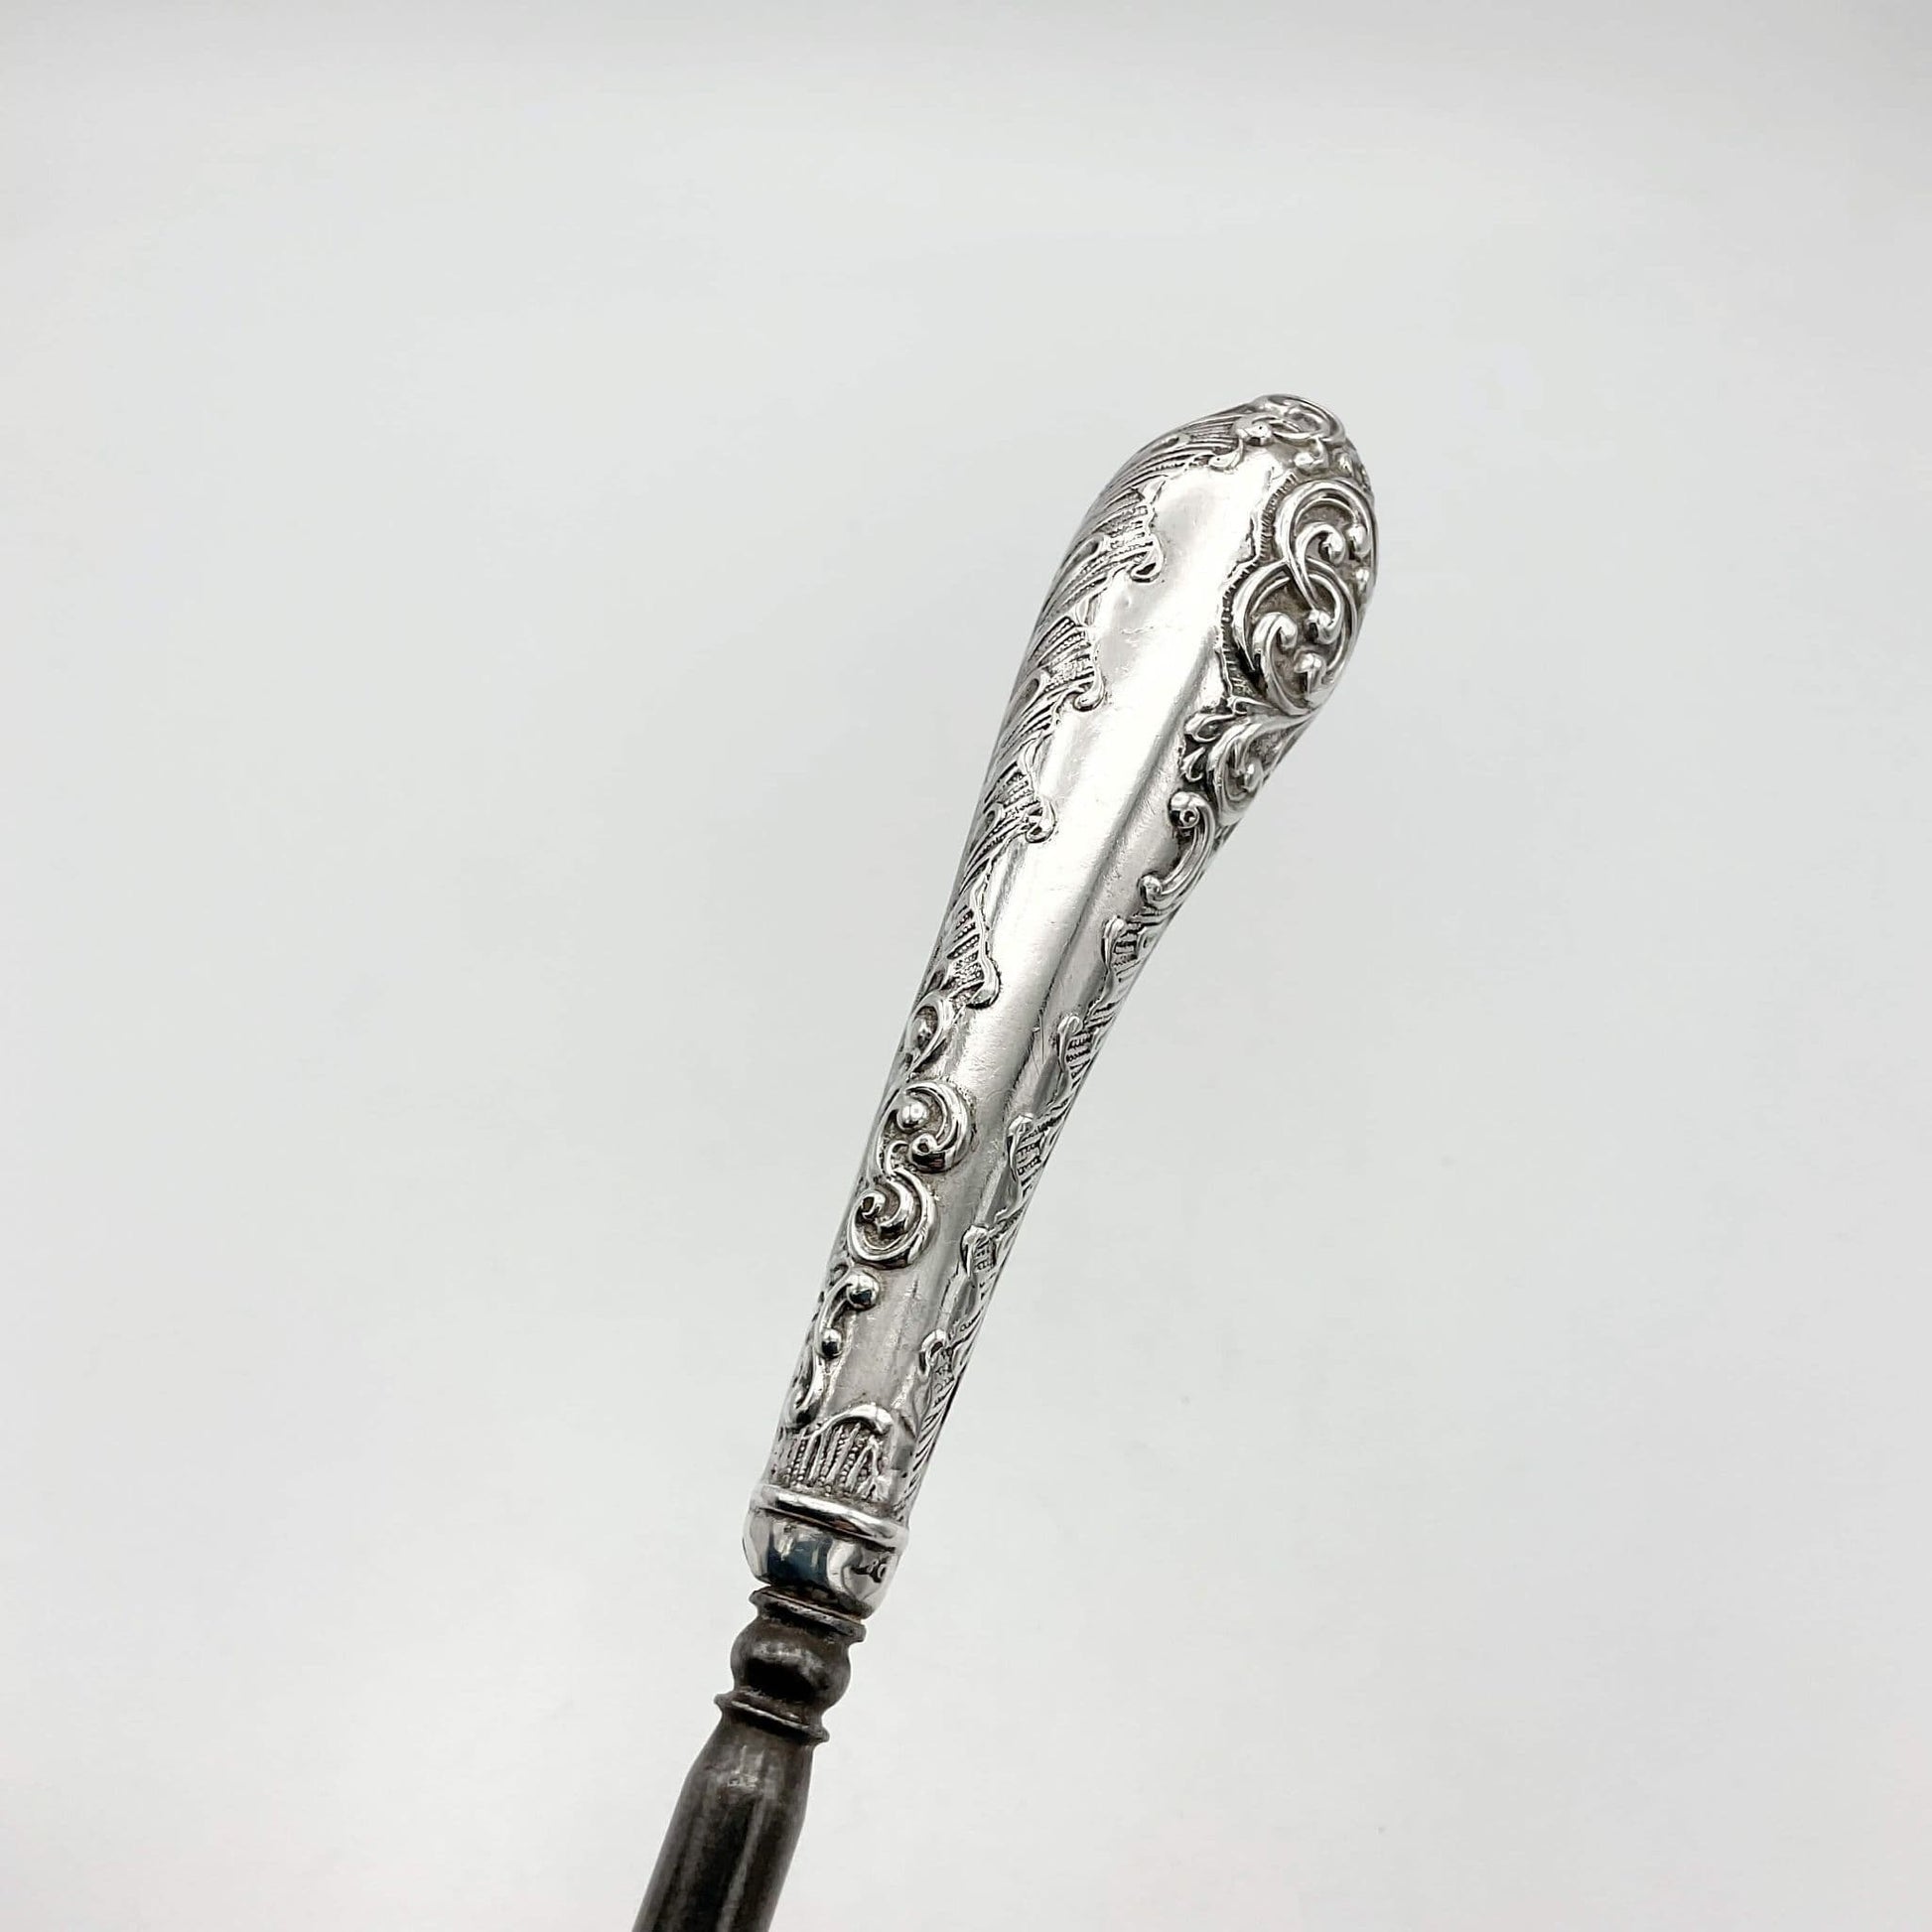 beautiful detailing on silver handle featuring scrolls on button hook